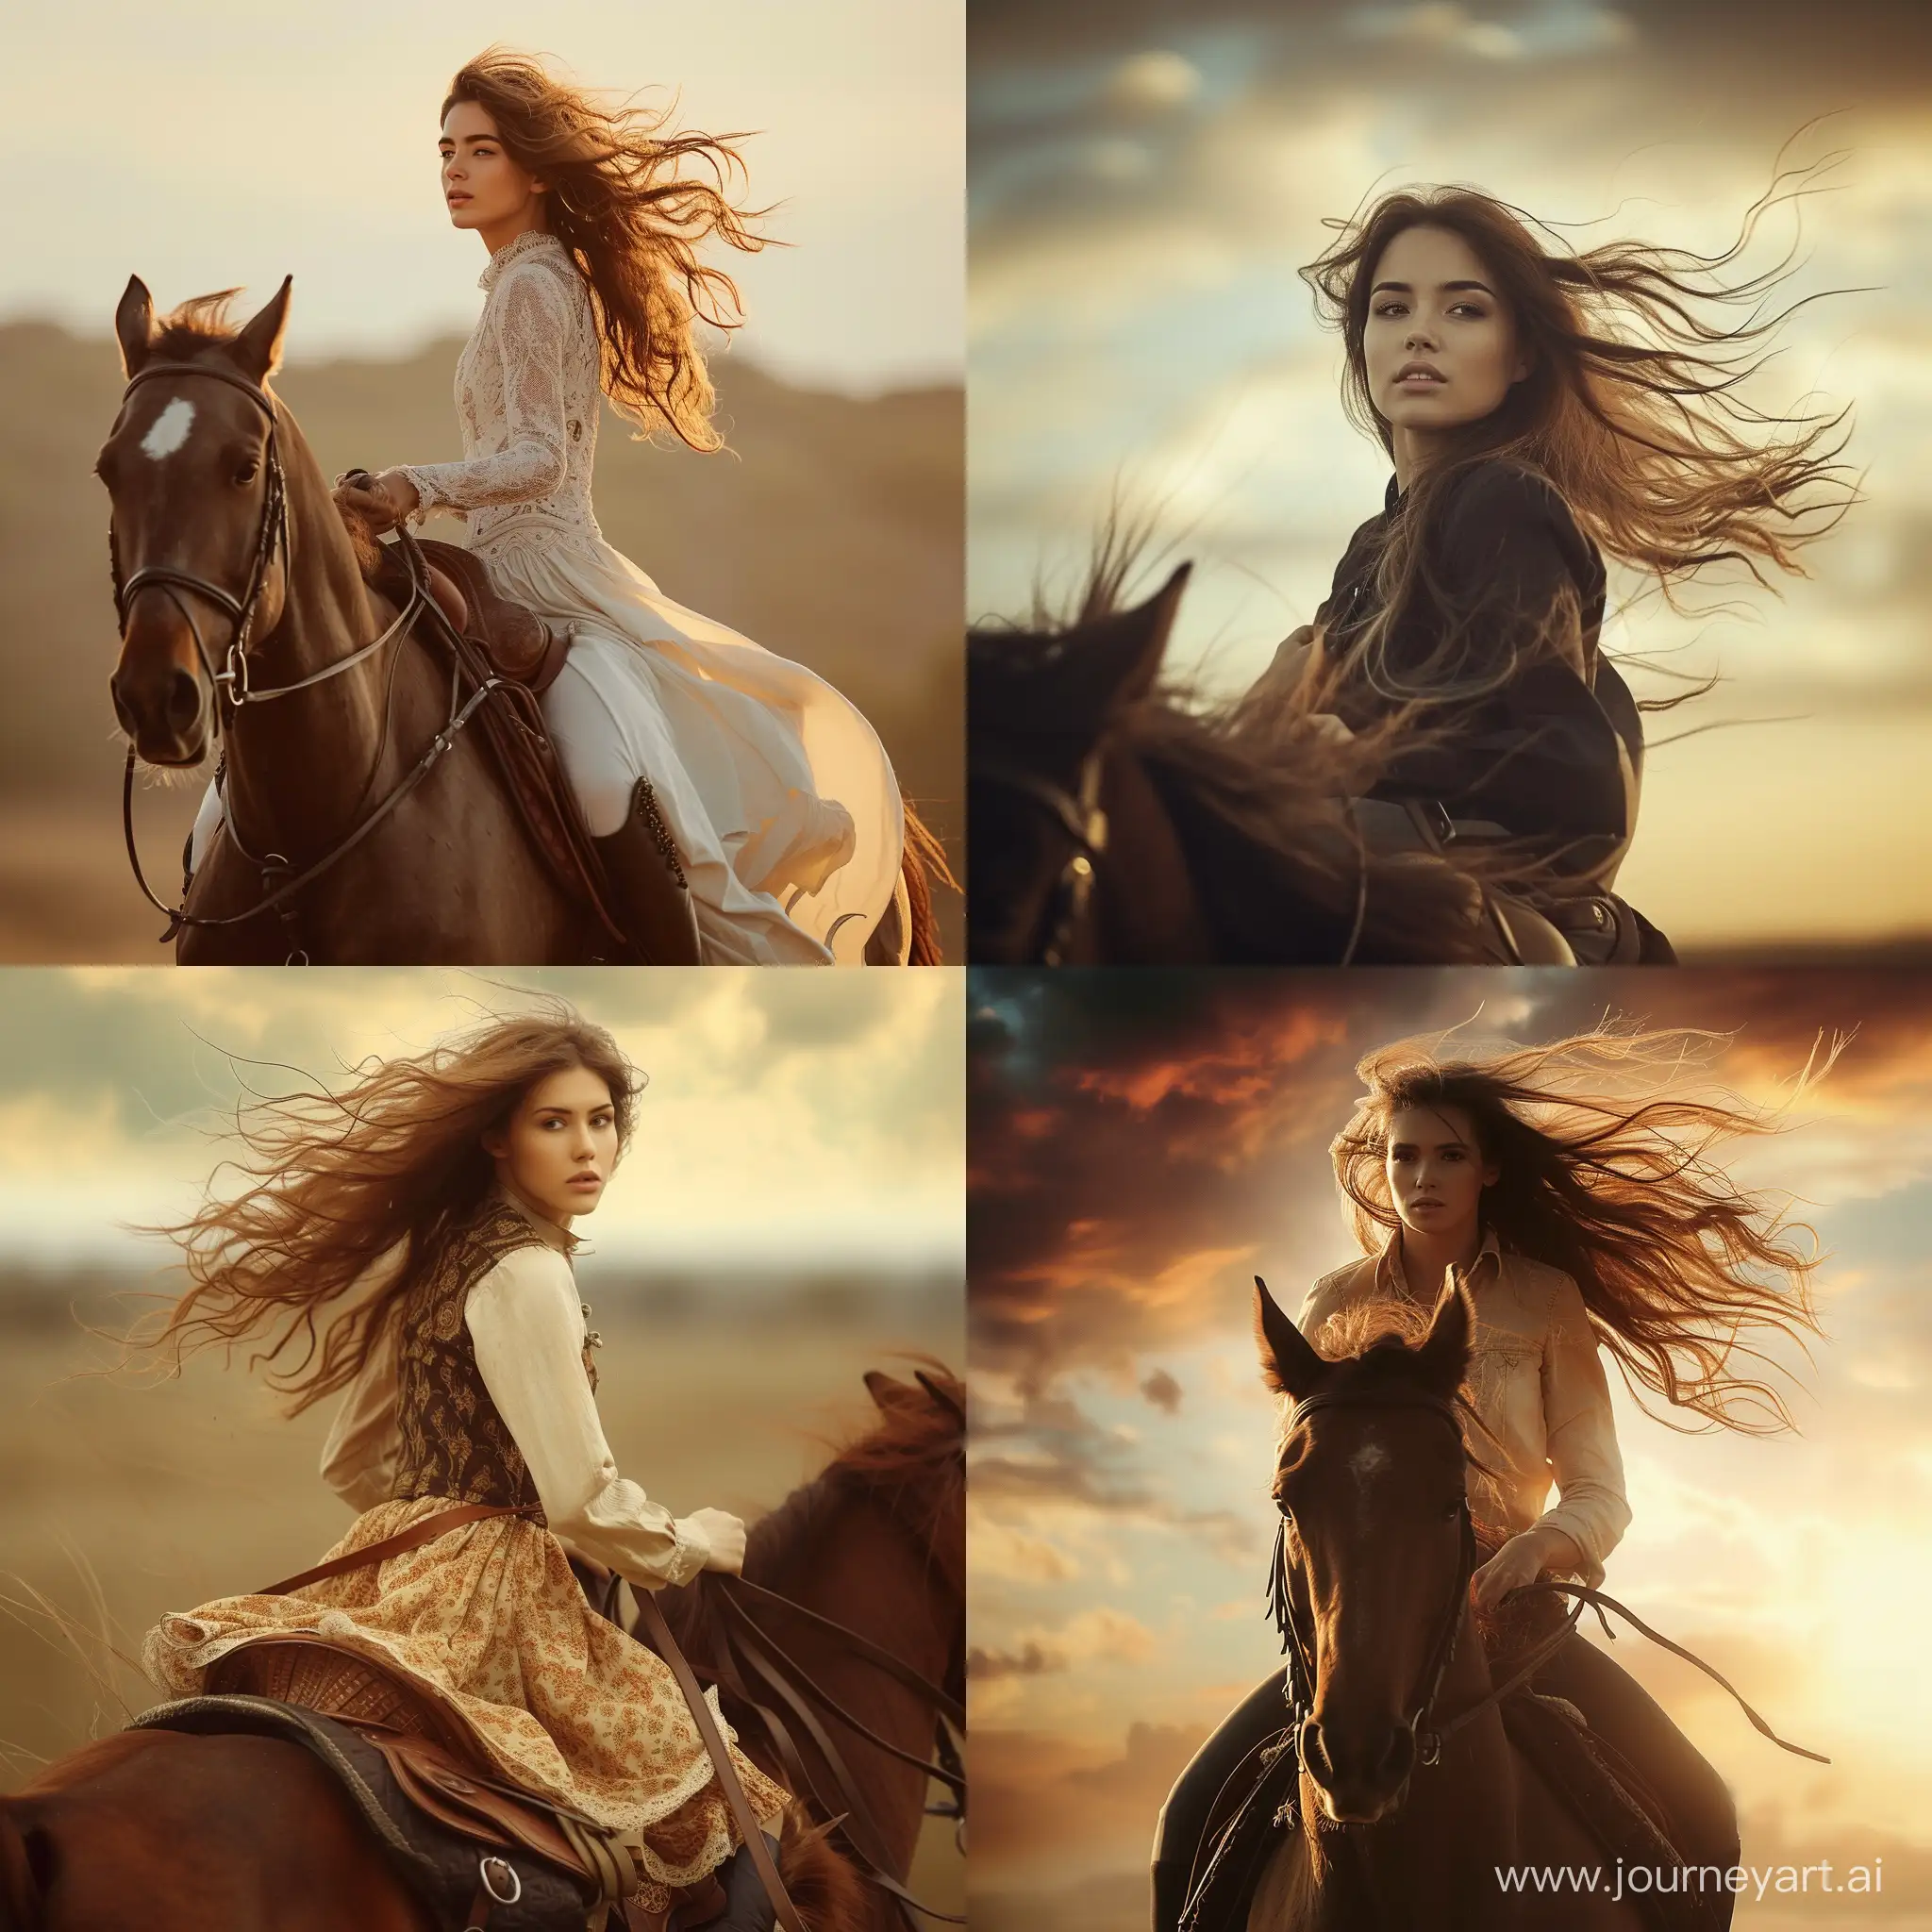 Graceful-Woman-Riding-Horse-with-Flowing-Hair